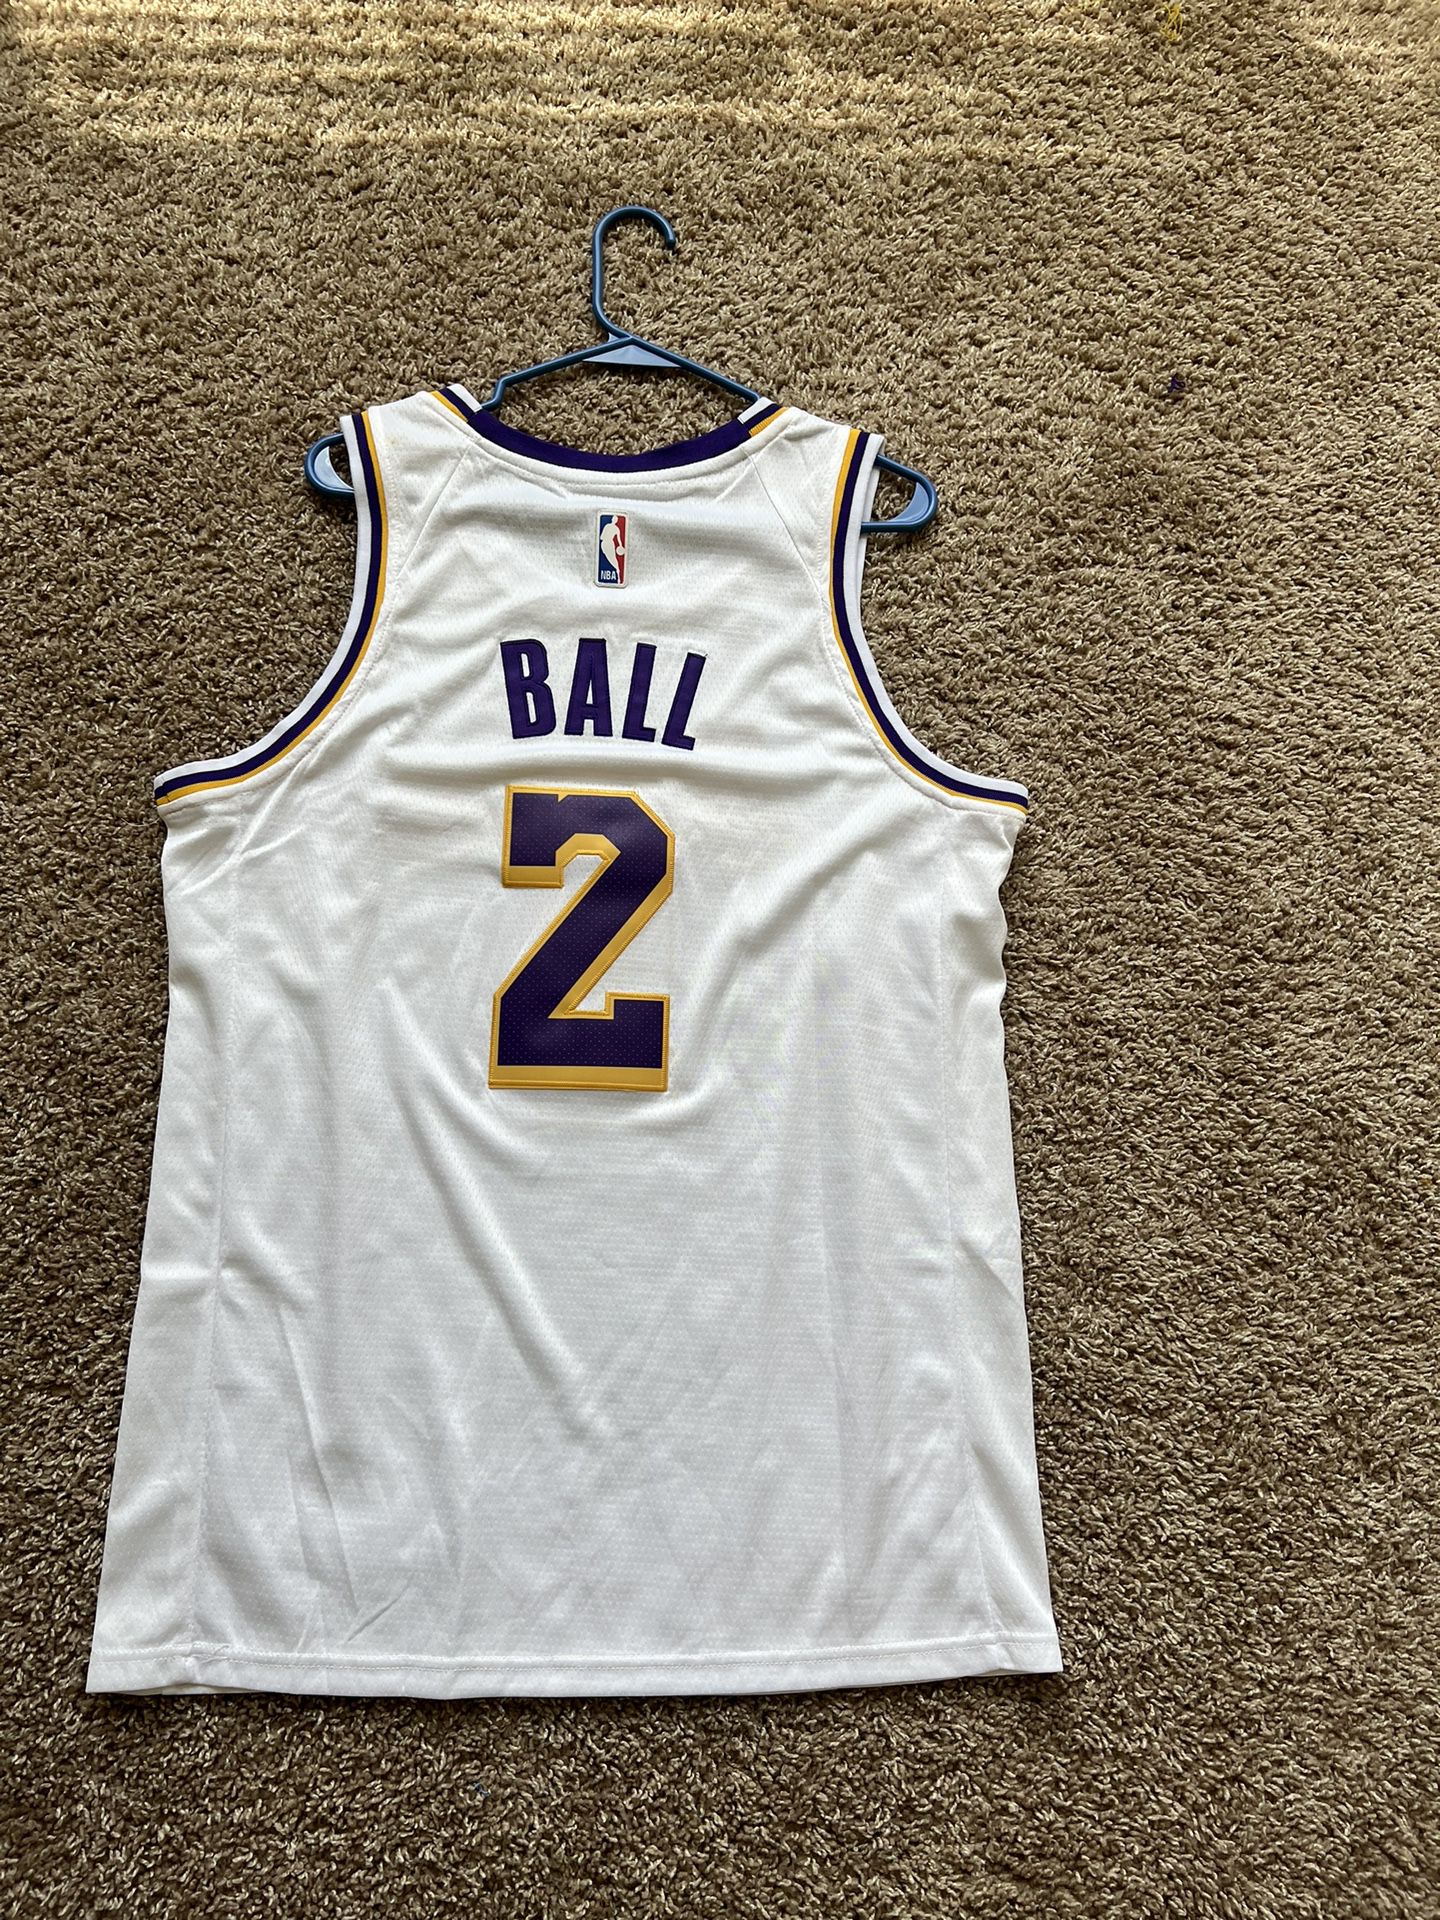 Lakers Lonzo Ball Jersey (large) for Sale in Bothell, WA - OfferUp